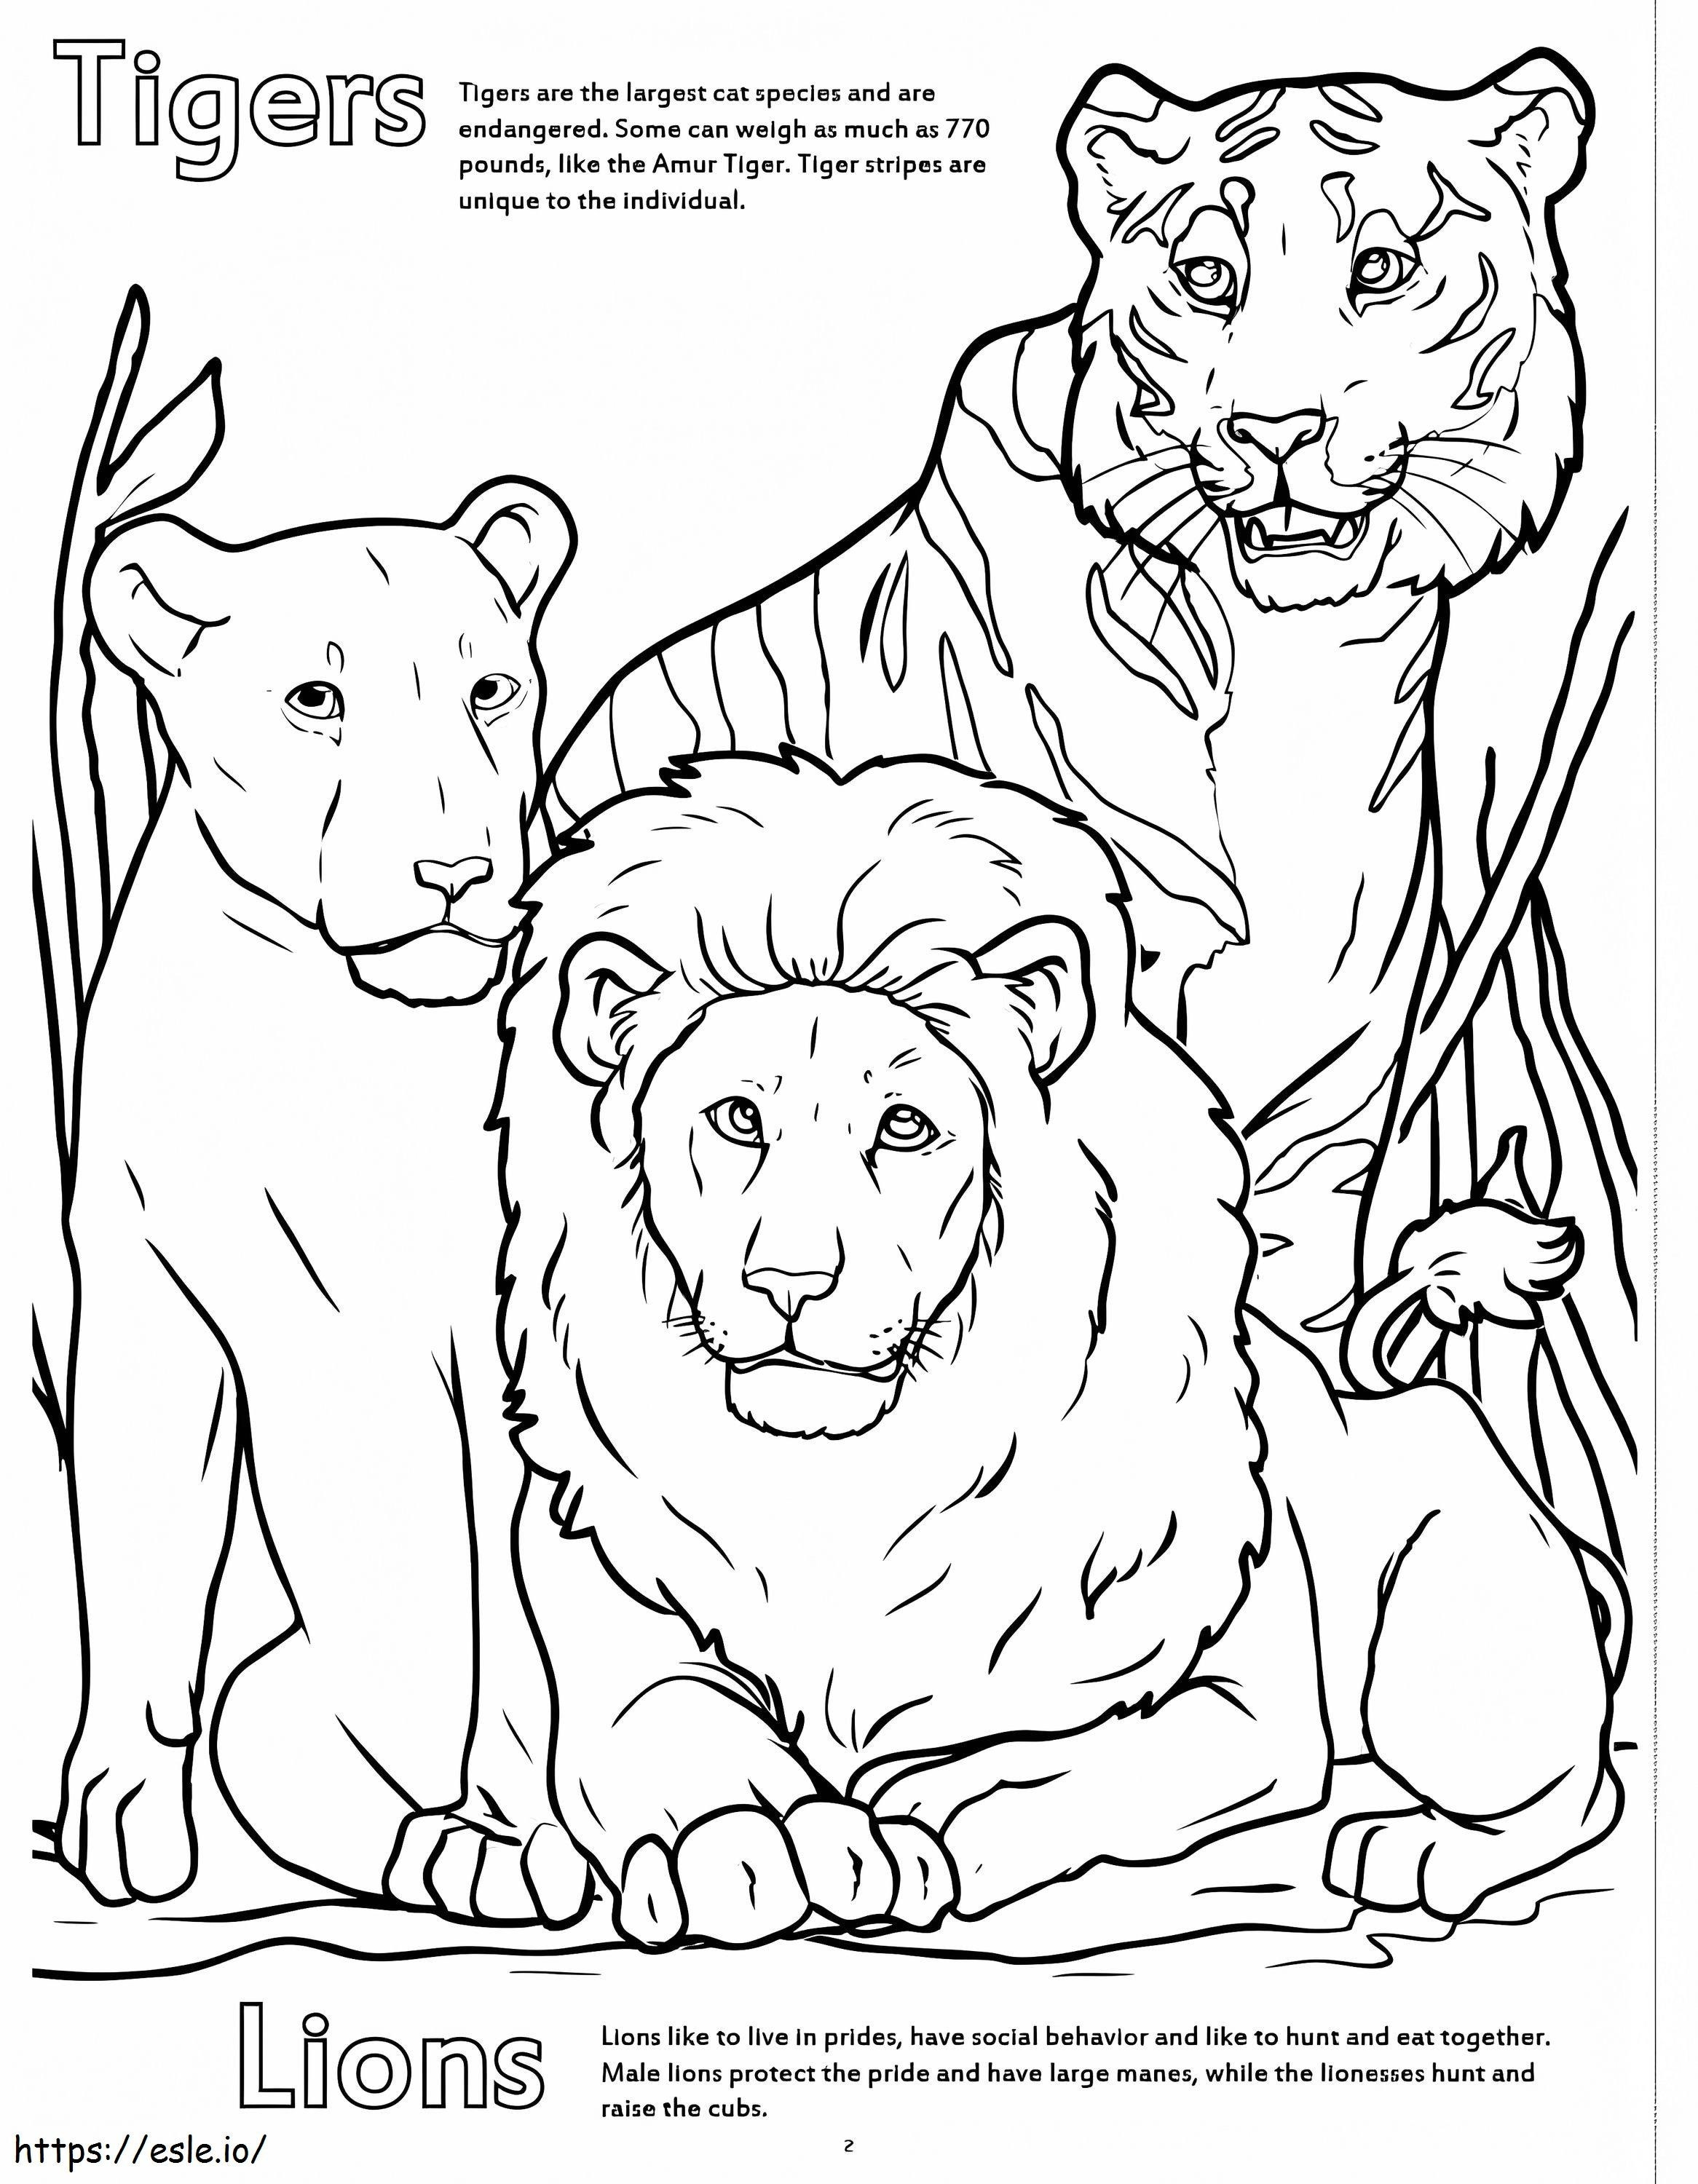 Tigers And Lions At The Zoo coloring page